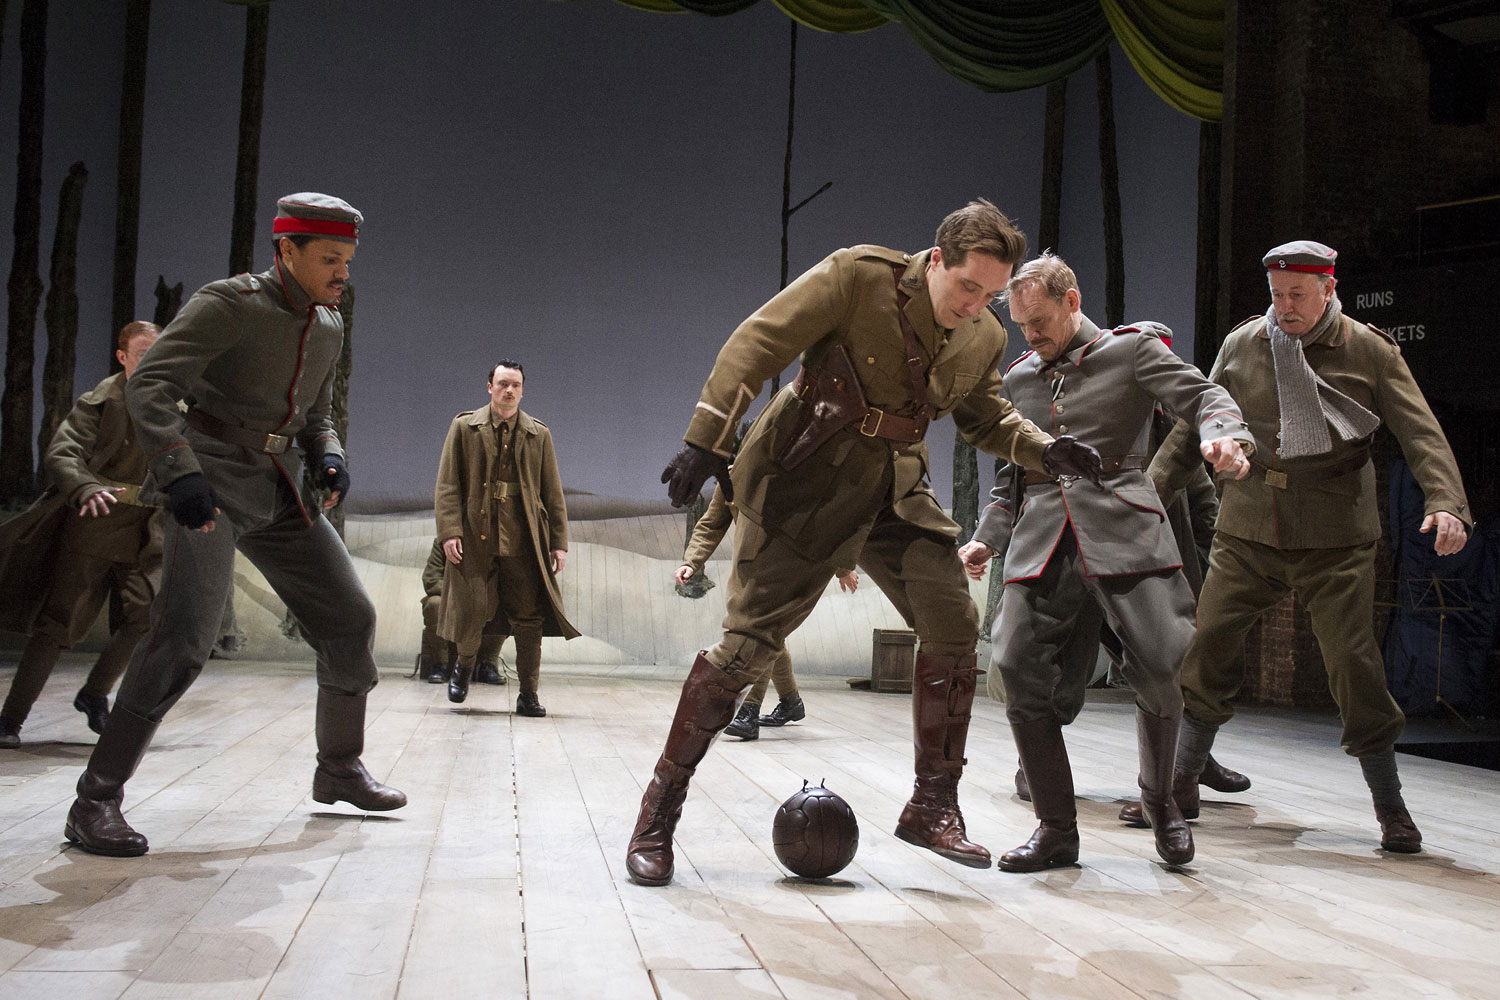 Warring soldiers playing football during a scene in 'The Christmas Truce'.